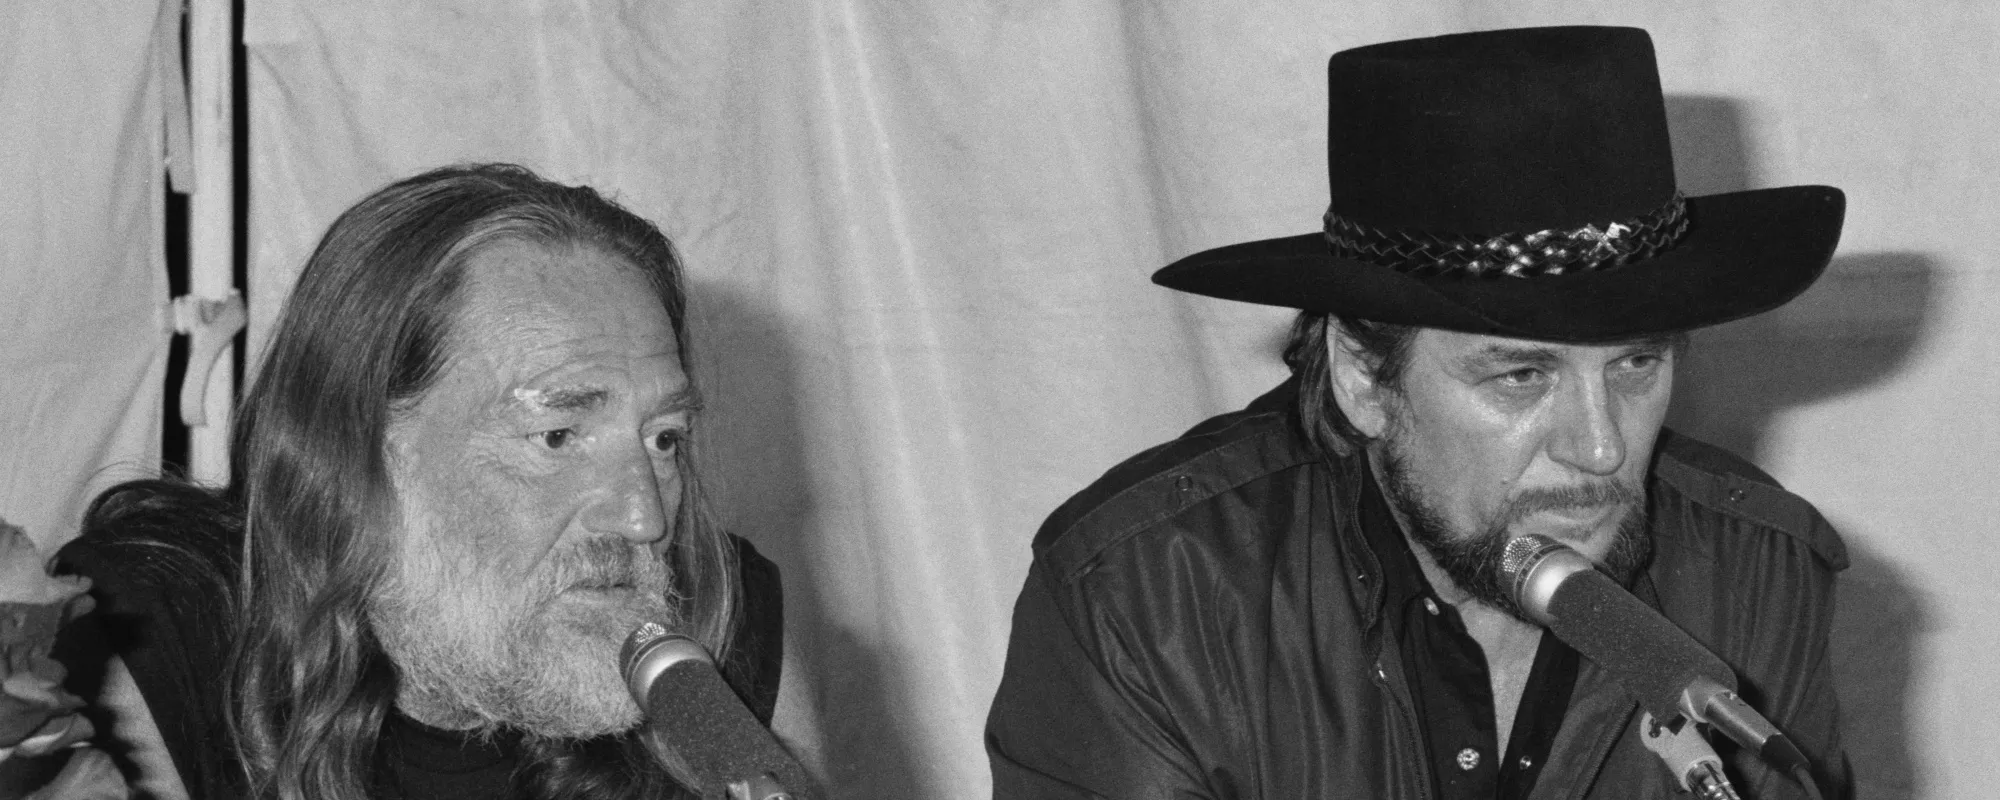 The Story Behind “Mammas Don’t Let Your Babies Grow Up To Be Cowboys” by Waylon Jennings with Willie Nelson and How It Became a Legendary Duet